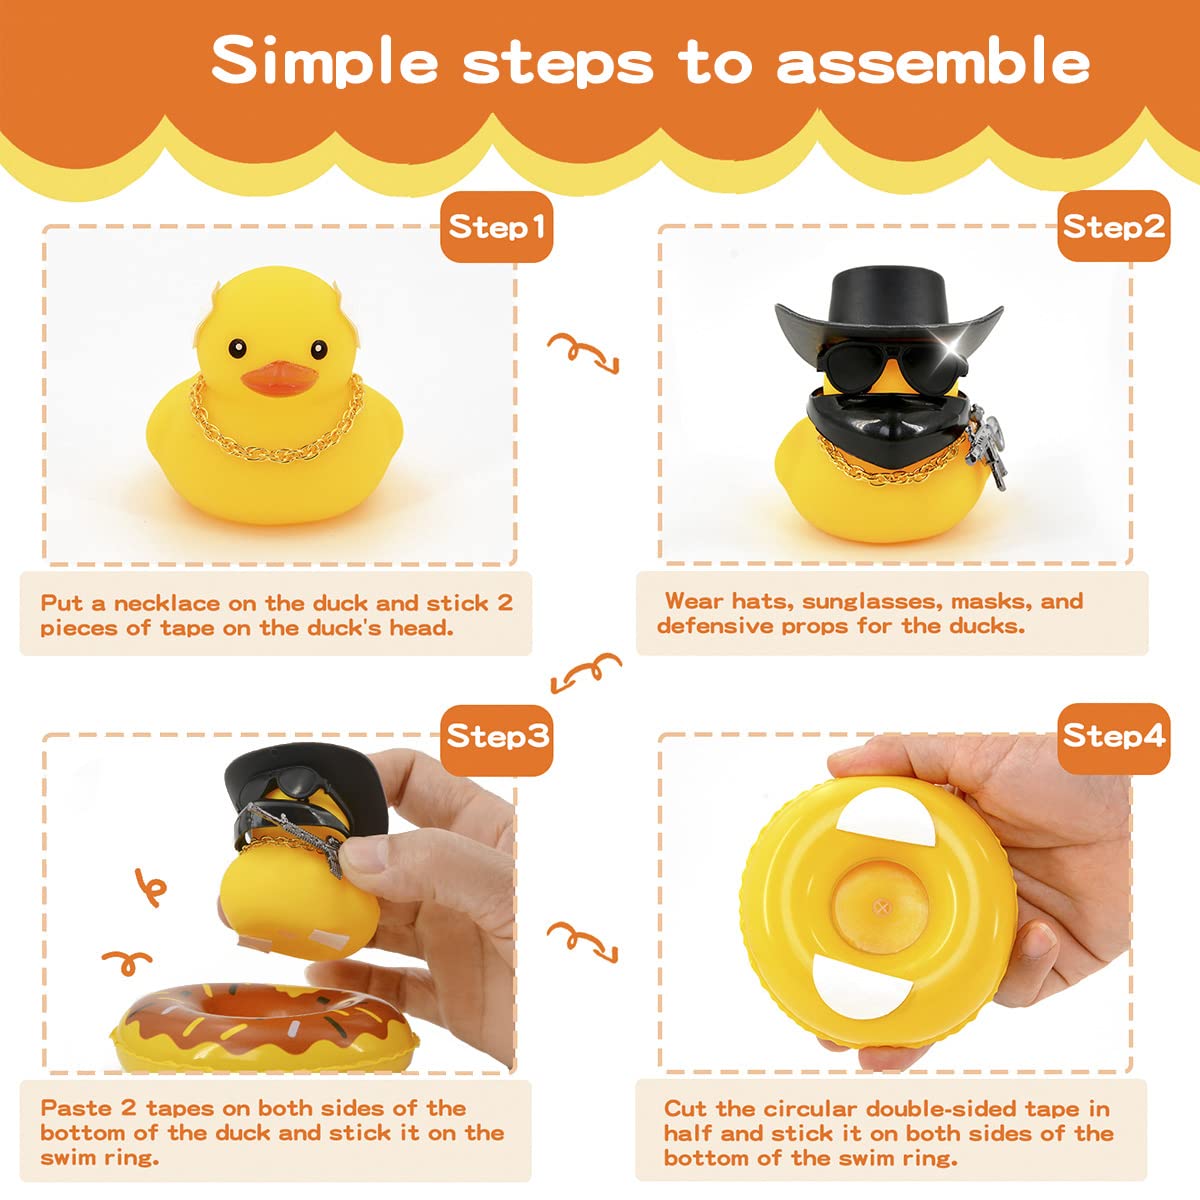 Ducks for Cars - Rubber Duck for Dashboard of Car, Yellow Duck Car Dashboard Decorations, Squeak Ducks Toys Car Ornaments Car Décor Accessories with Hat Swim Ring Necklace Sunglasses for Decor Home